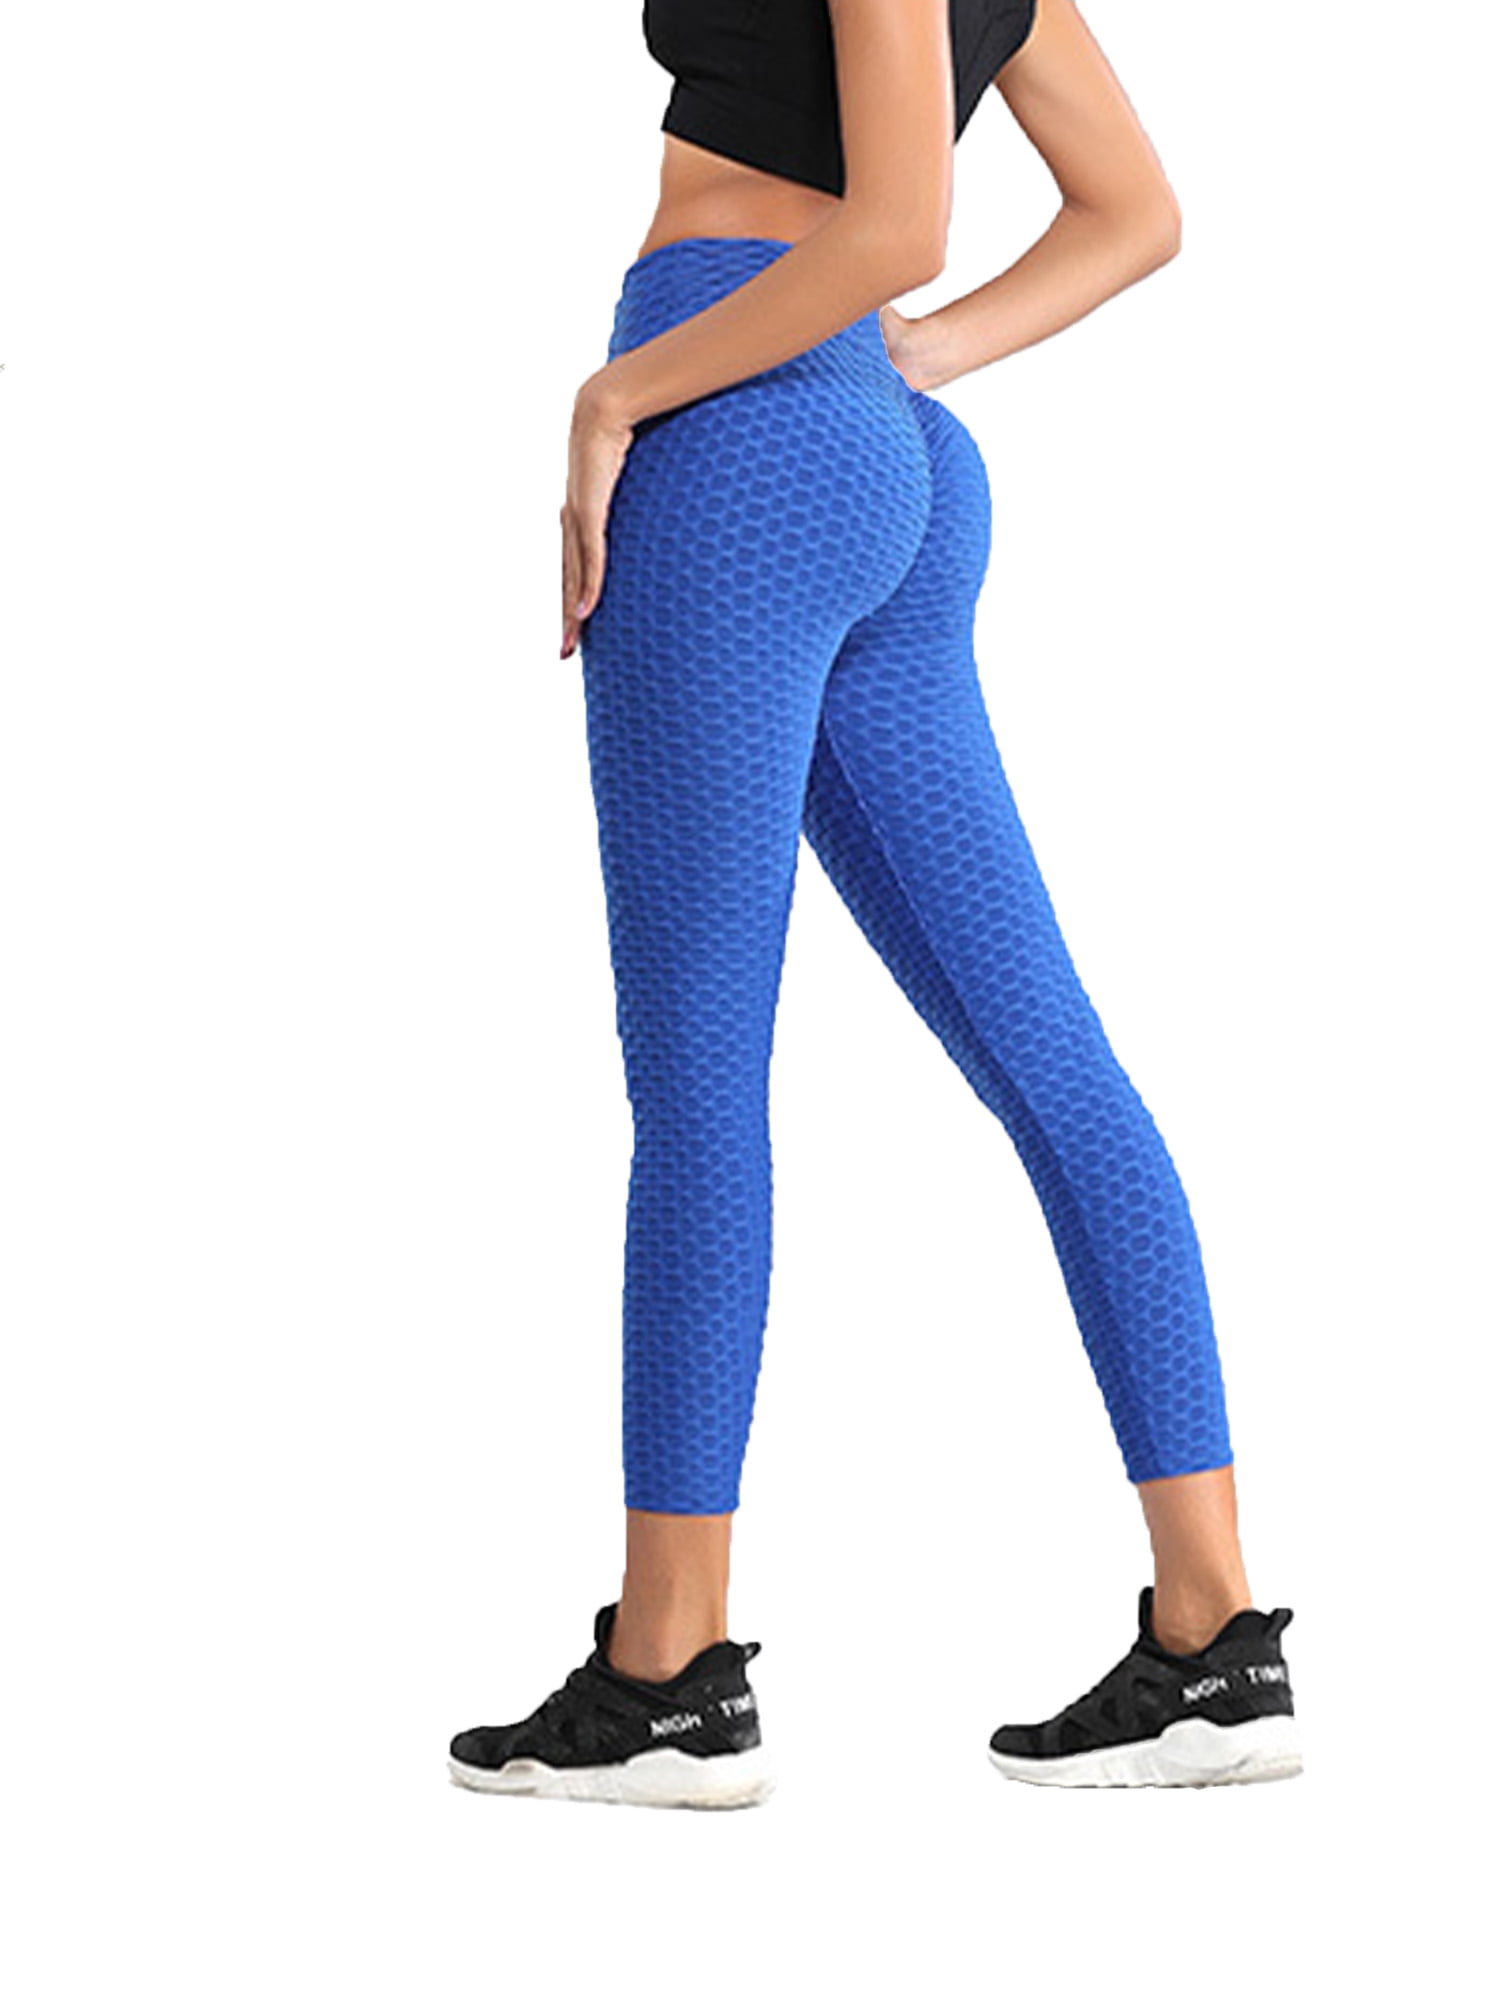 Womens Push Up Yoga Gym Leggings Sports Pants High Waist Ruched Fitness Trousers 